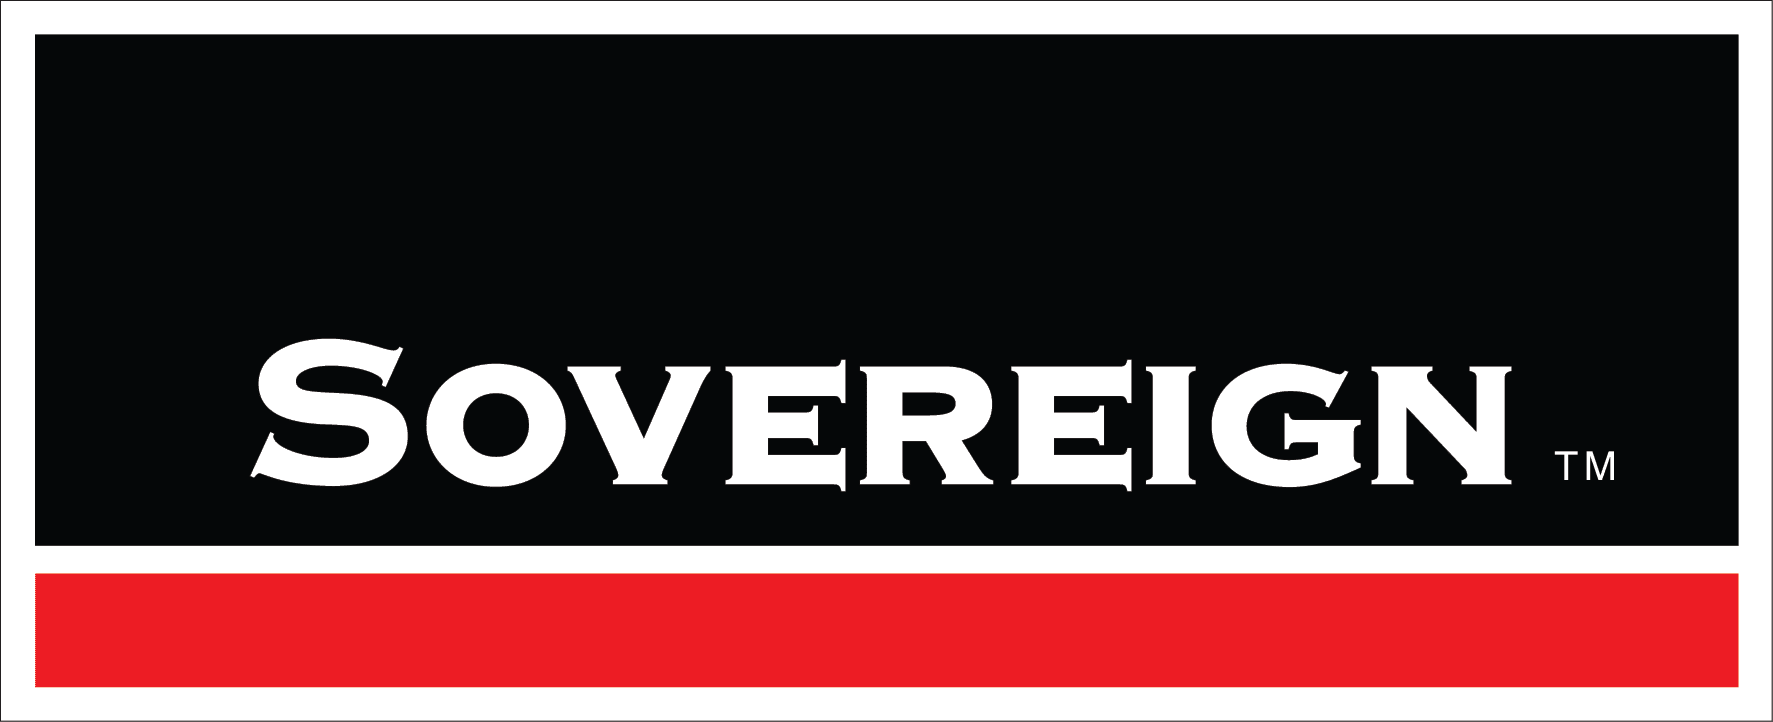 Nicola Anthony Sovereign Group logo.png